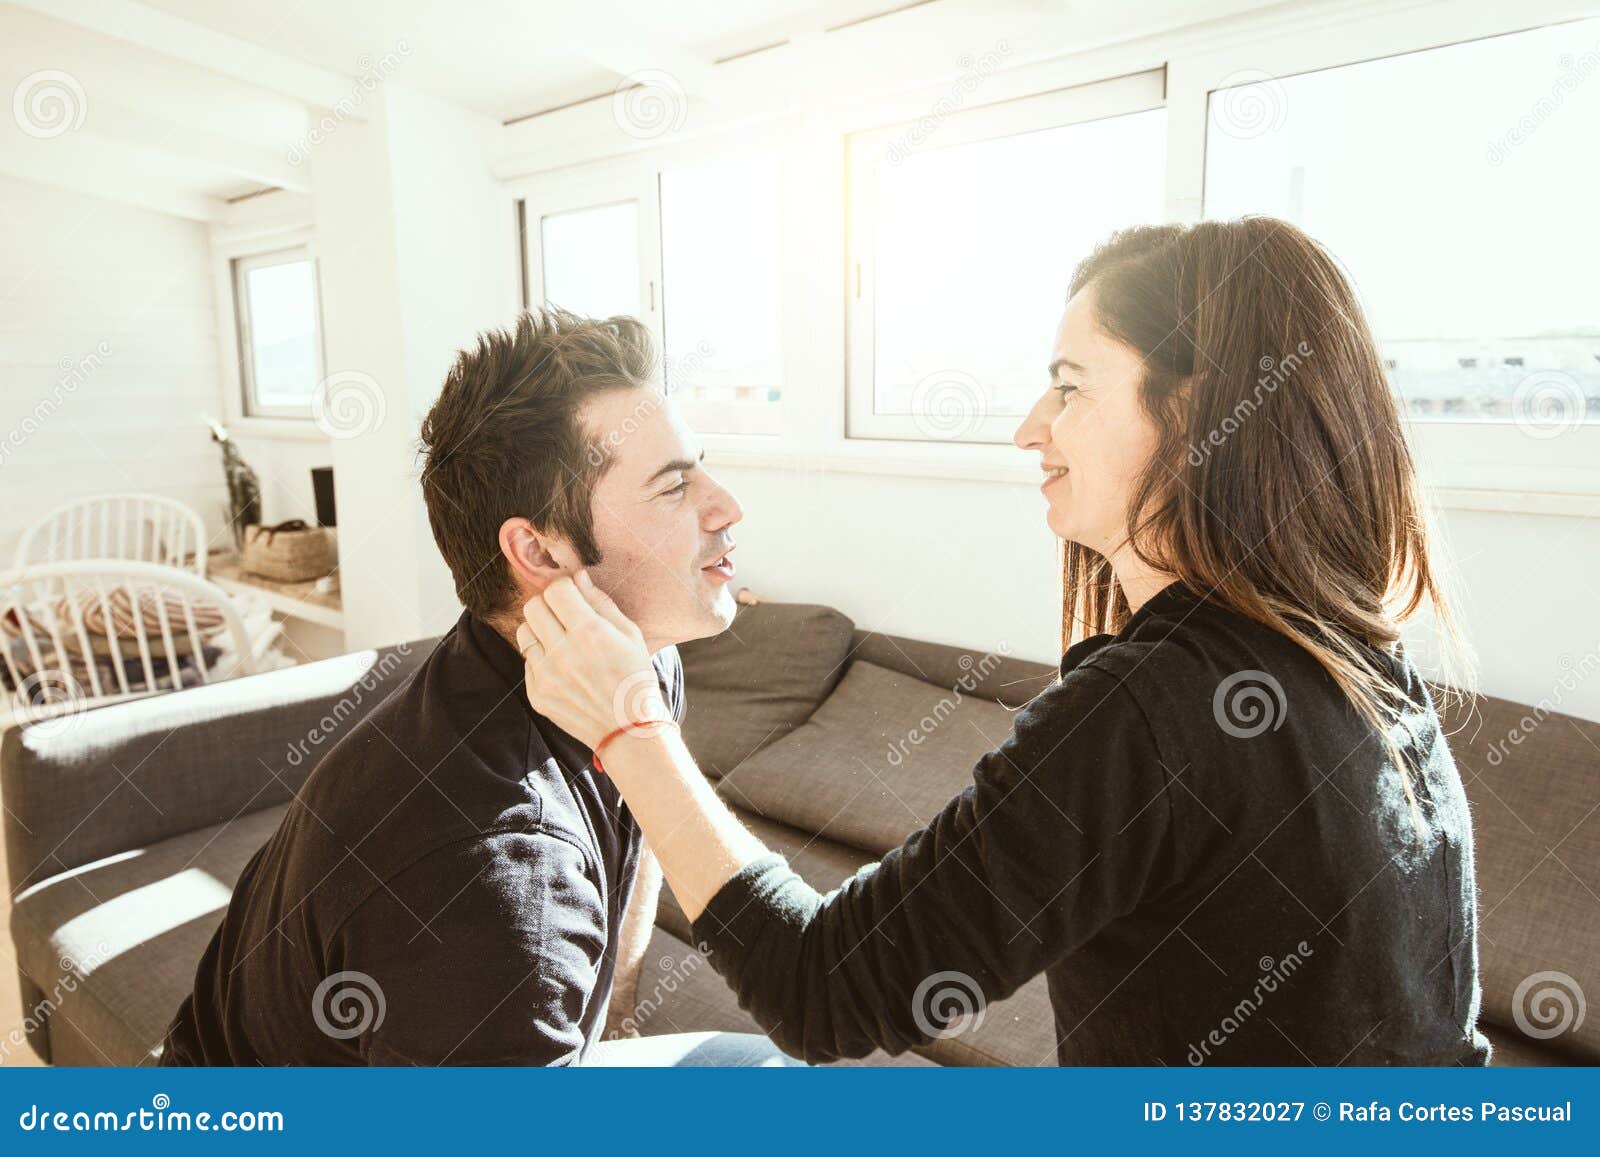 A Young Woman Caressing Her Partner Affectionately Stock Image Image Of Heterosexual Leisure 